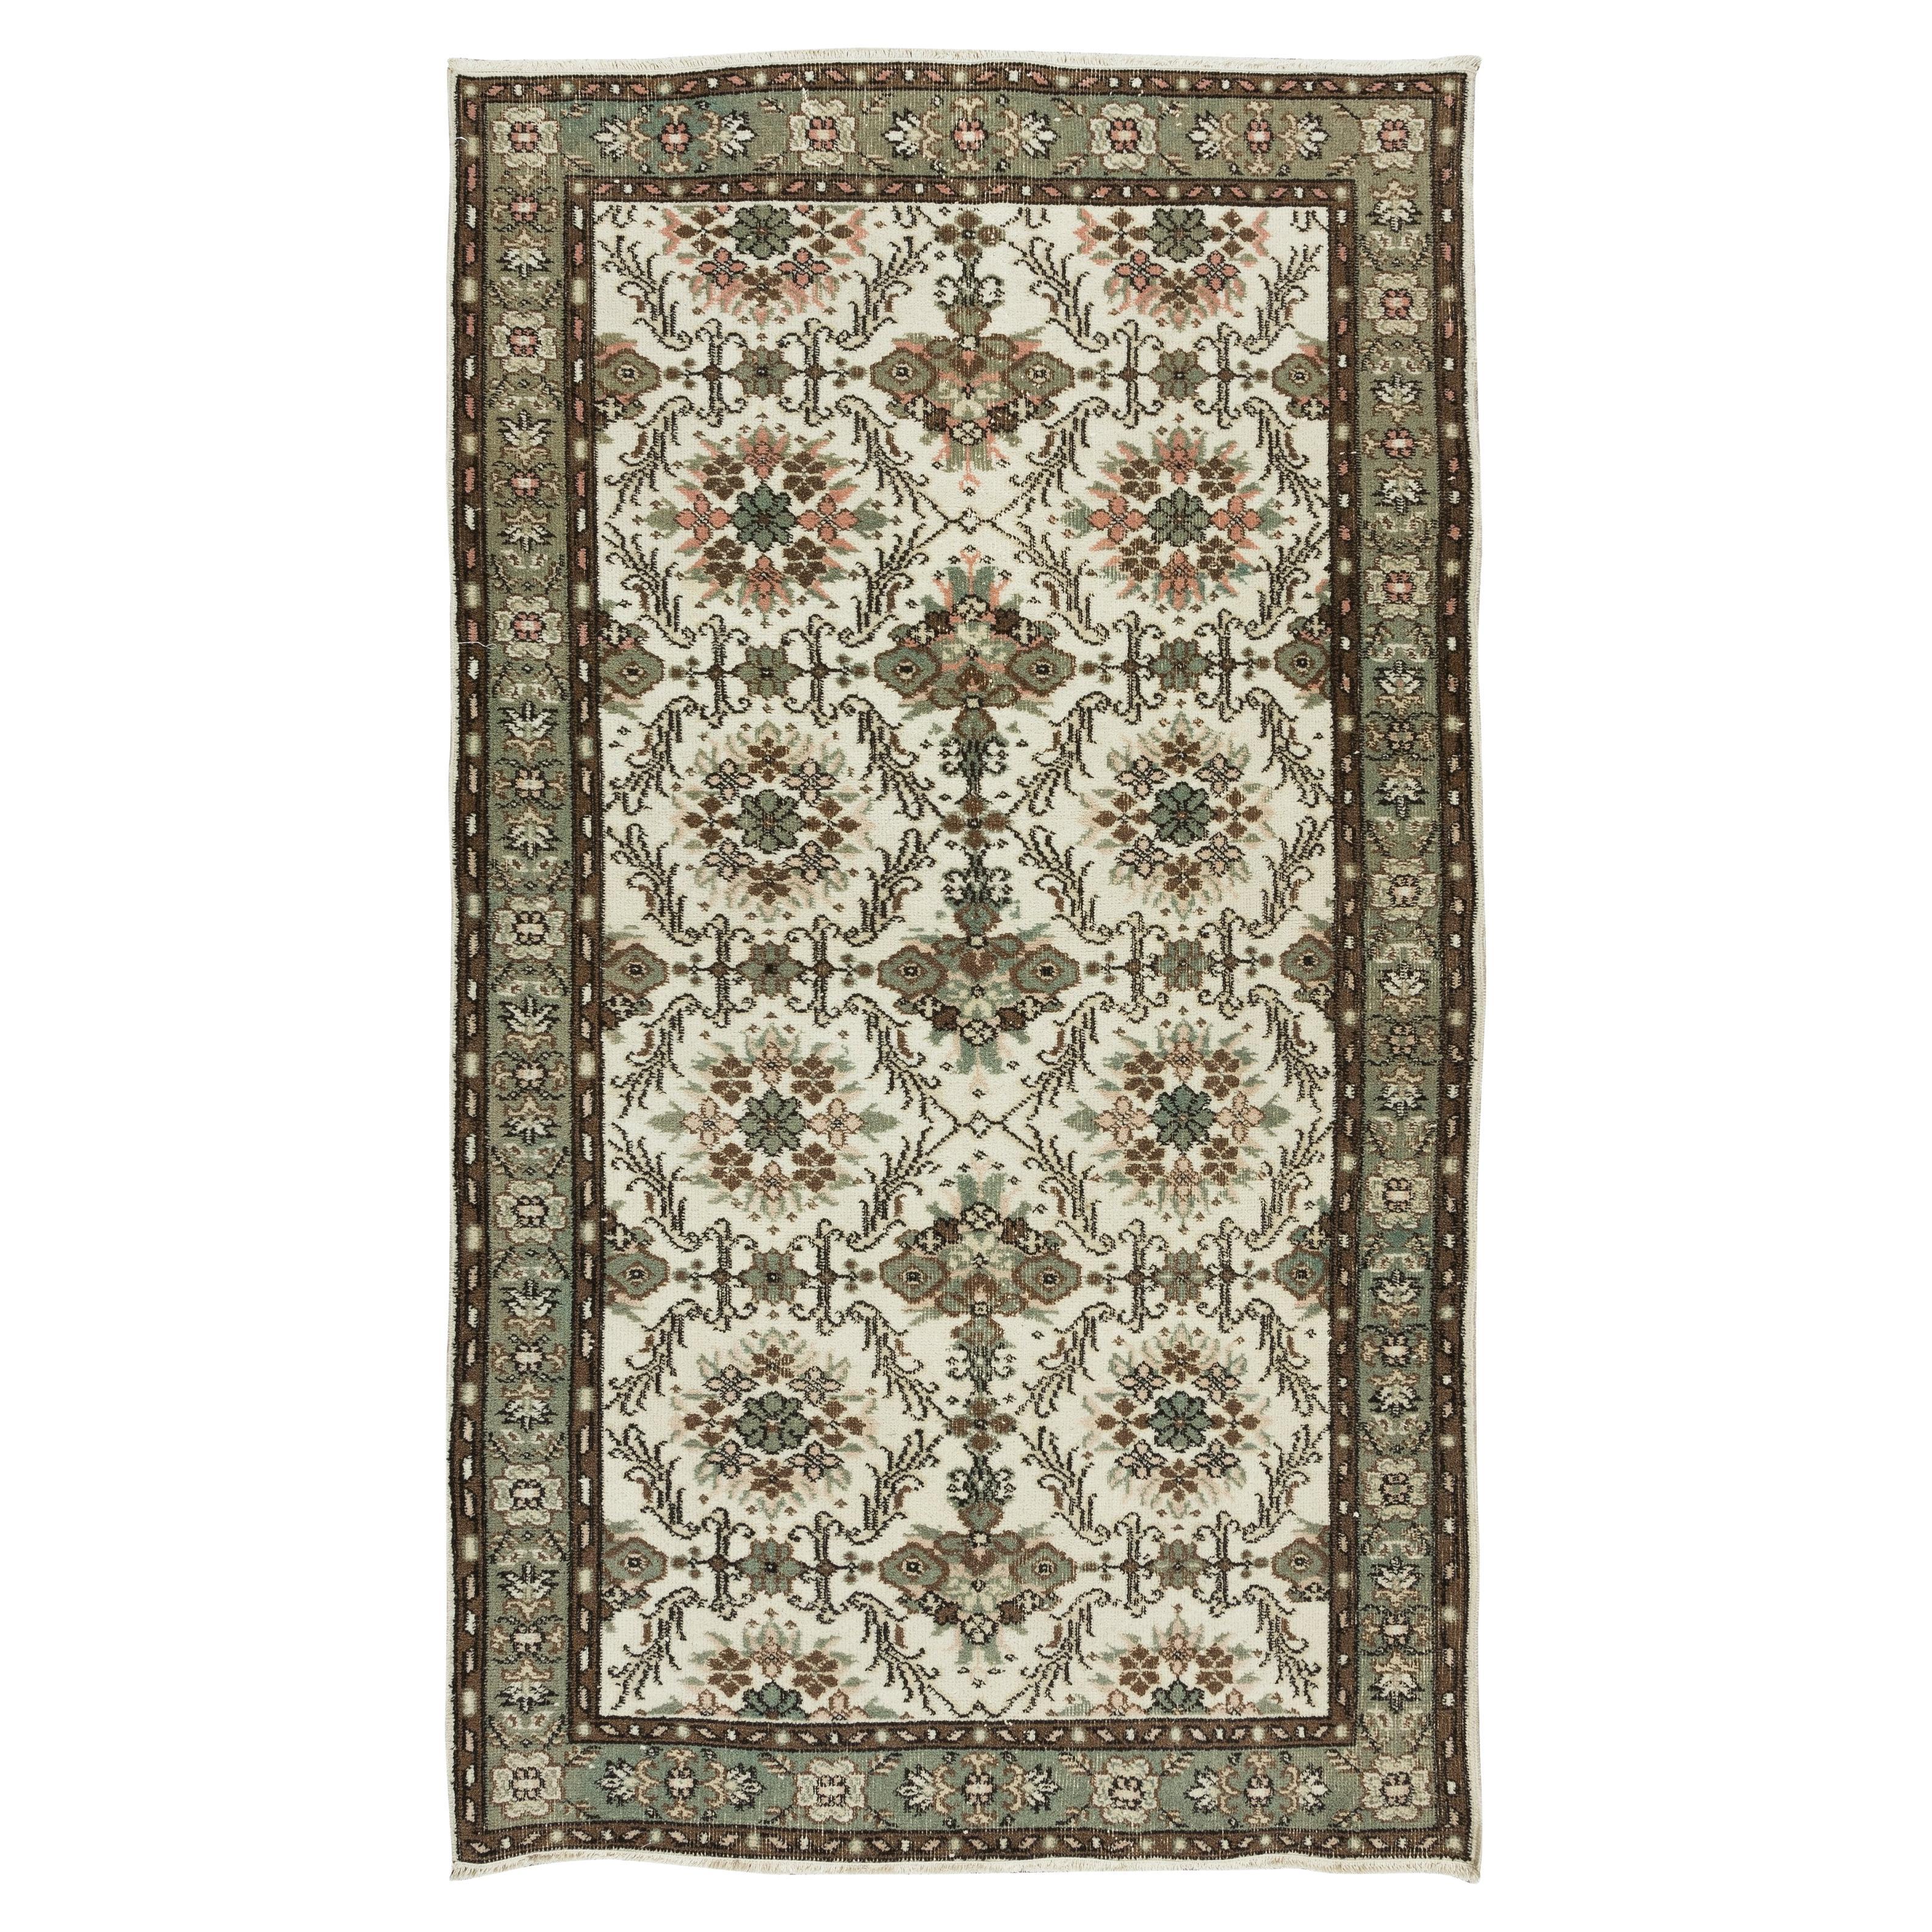 3.8x6.8 Ft Hand Knotted Turkish Wool Rug, Floral Pattern Vintage Floor Covering For Sale